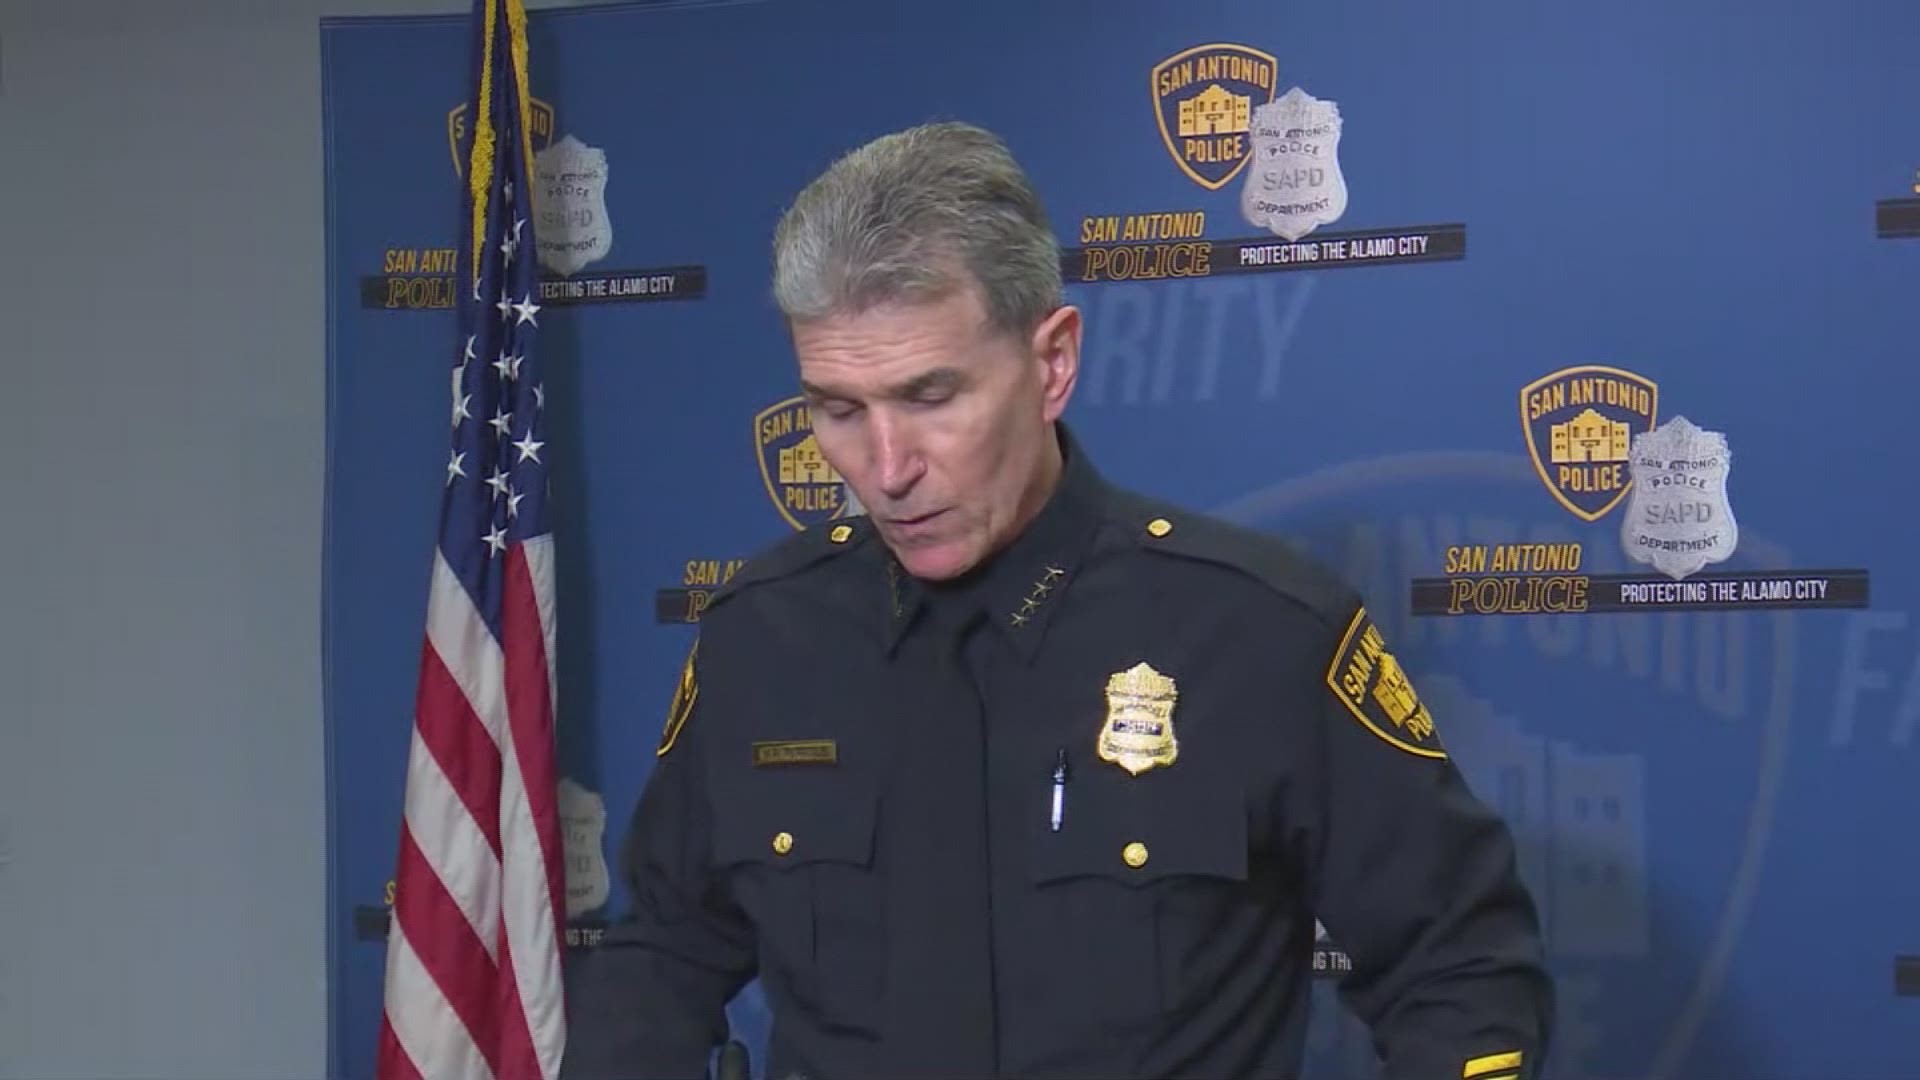 Speaking to reporters Monday, SAPD Chief William McManus said tahat police unequivocally believed that the abduction of 8-month-old King Jay Davila was staged. Baby King is still missing.